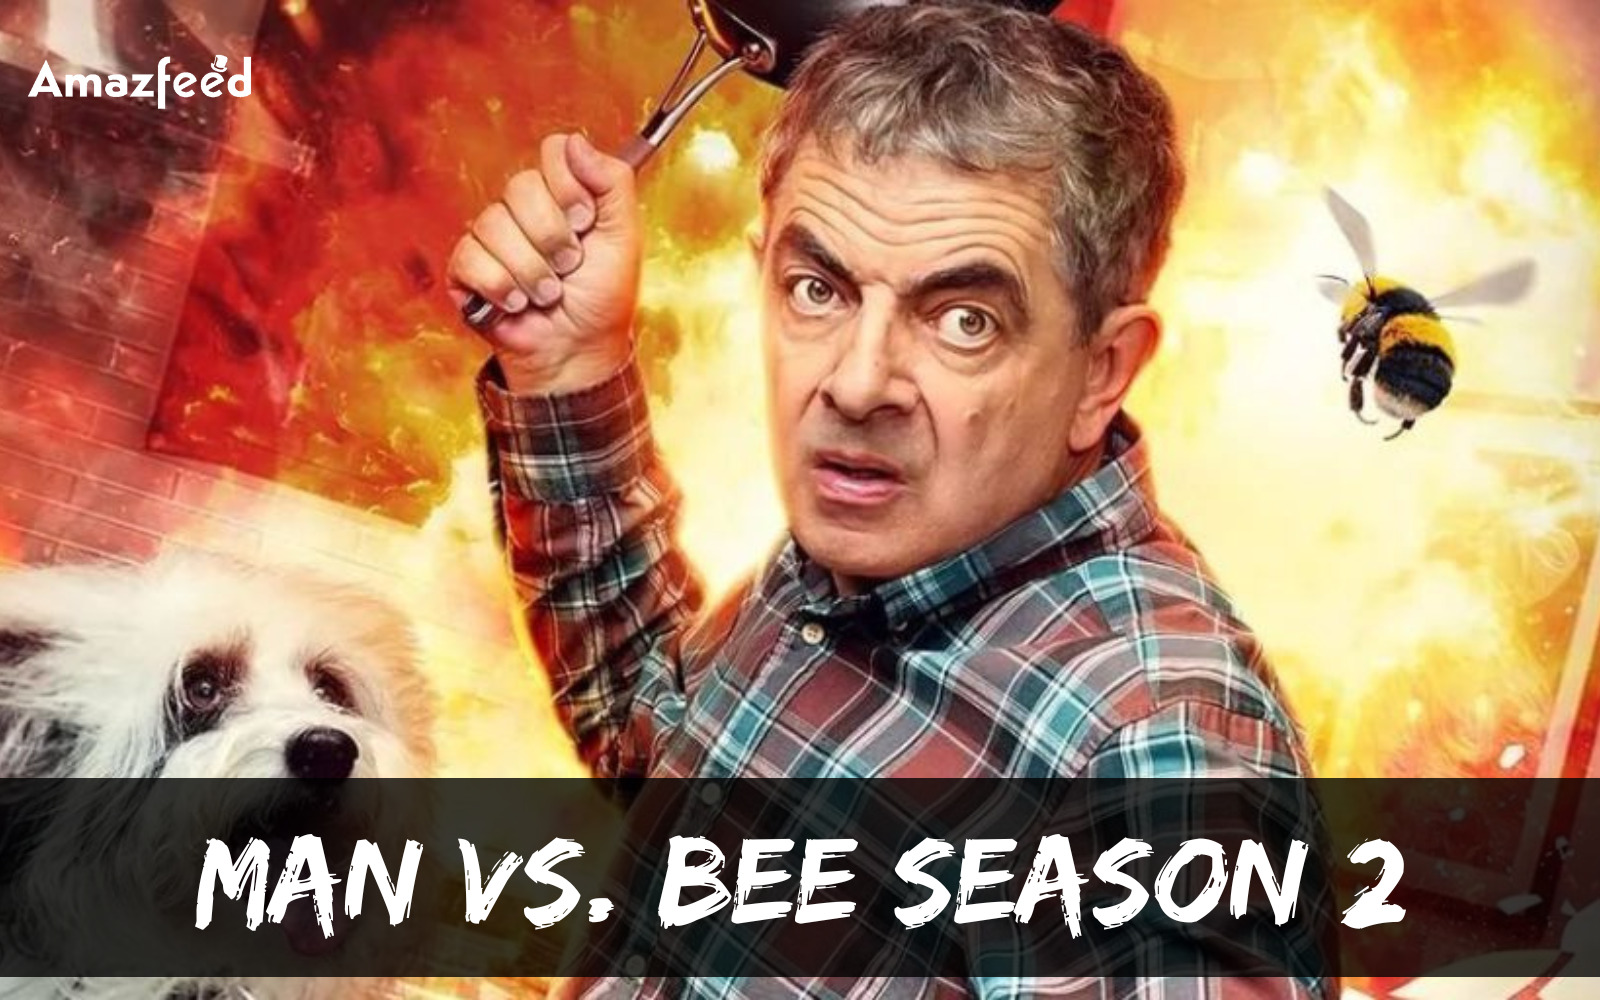 When Is Man Vs. Bee Season 2 Coming Out